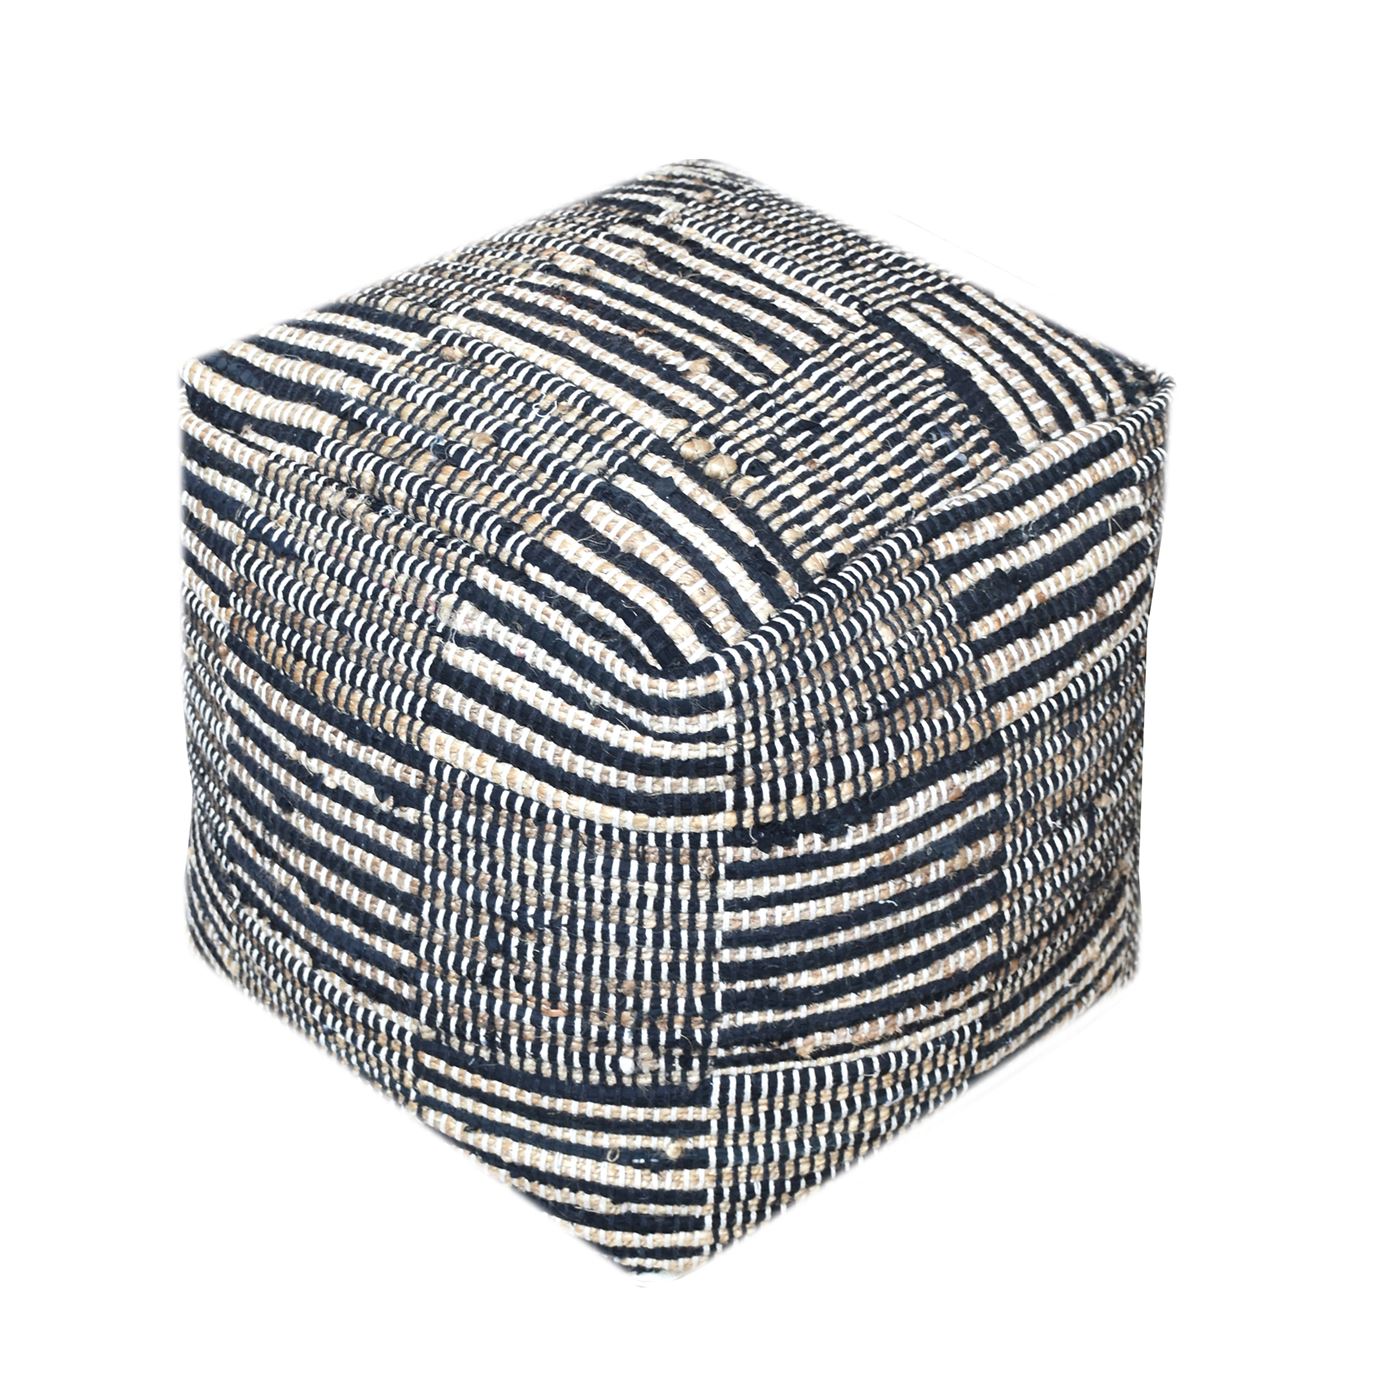 Rodeo Pouf, Hemp, Recycled Cotton, Charcoal, Natural, Pitloom, Flat Weave